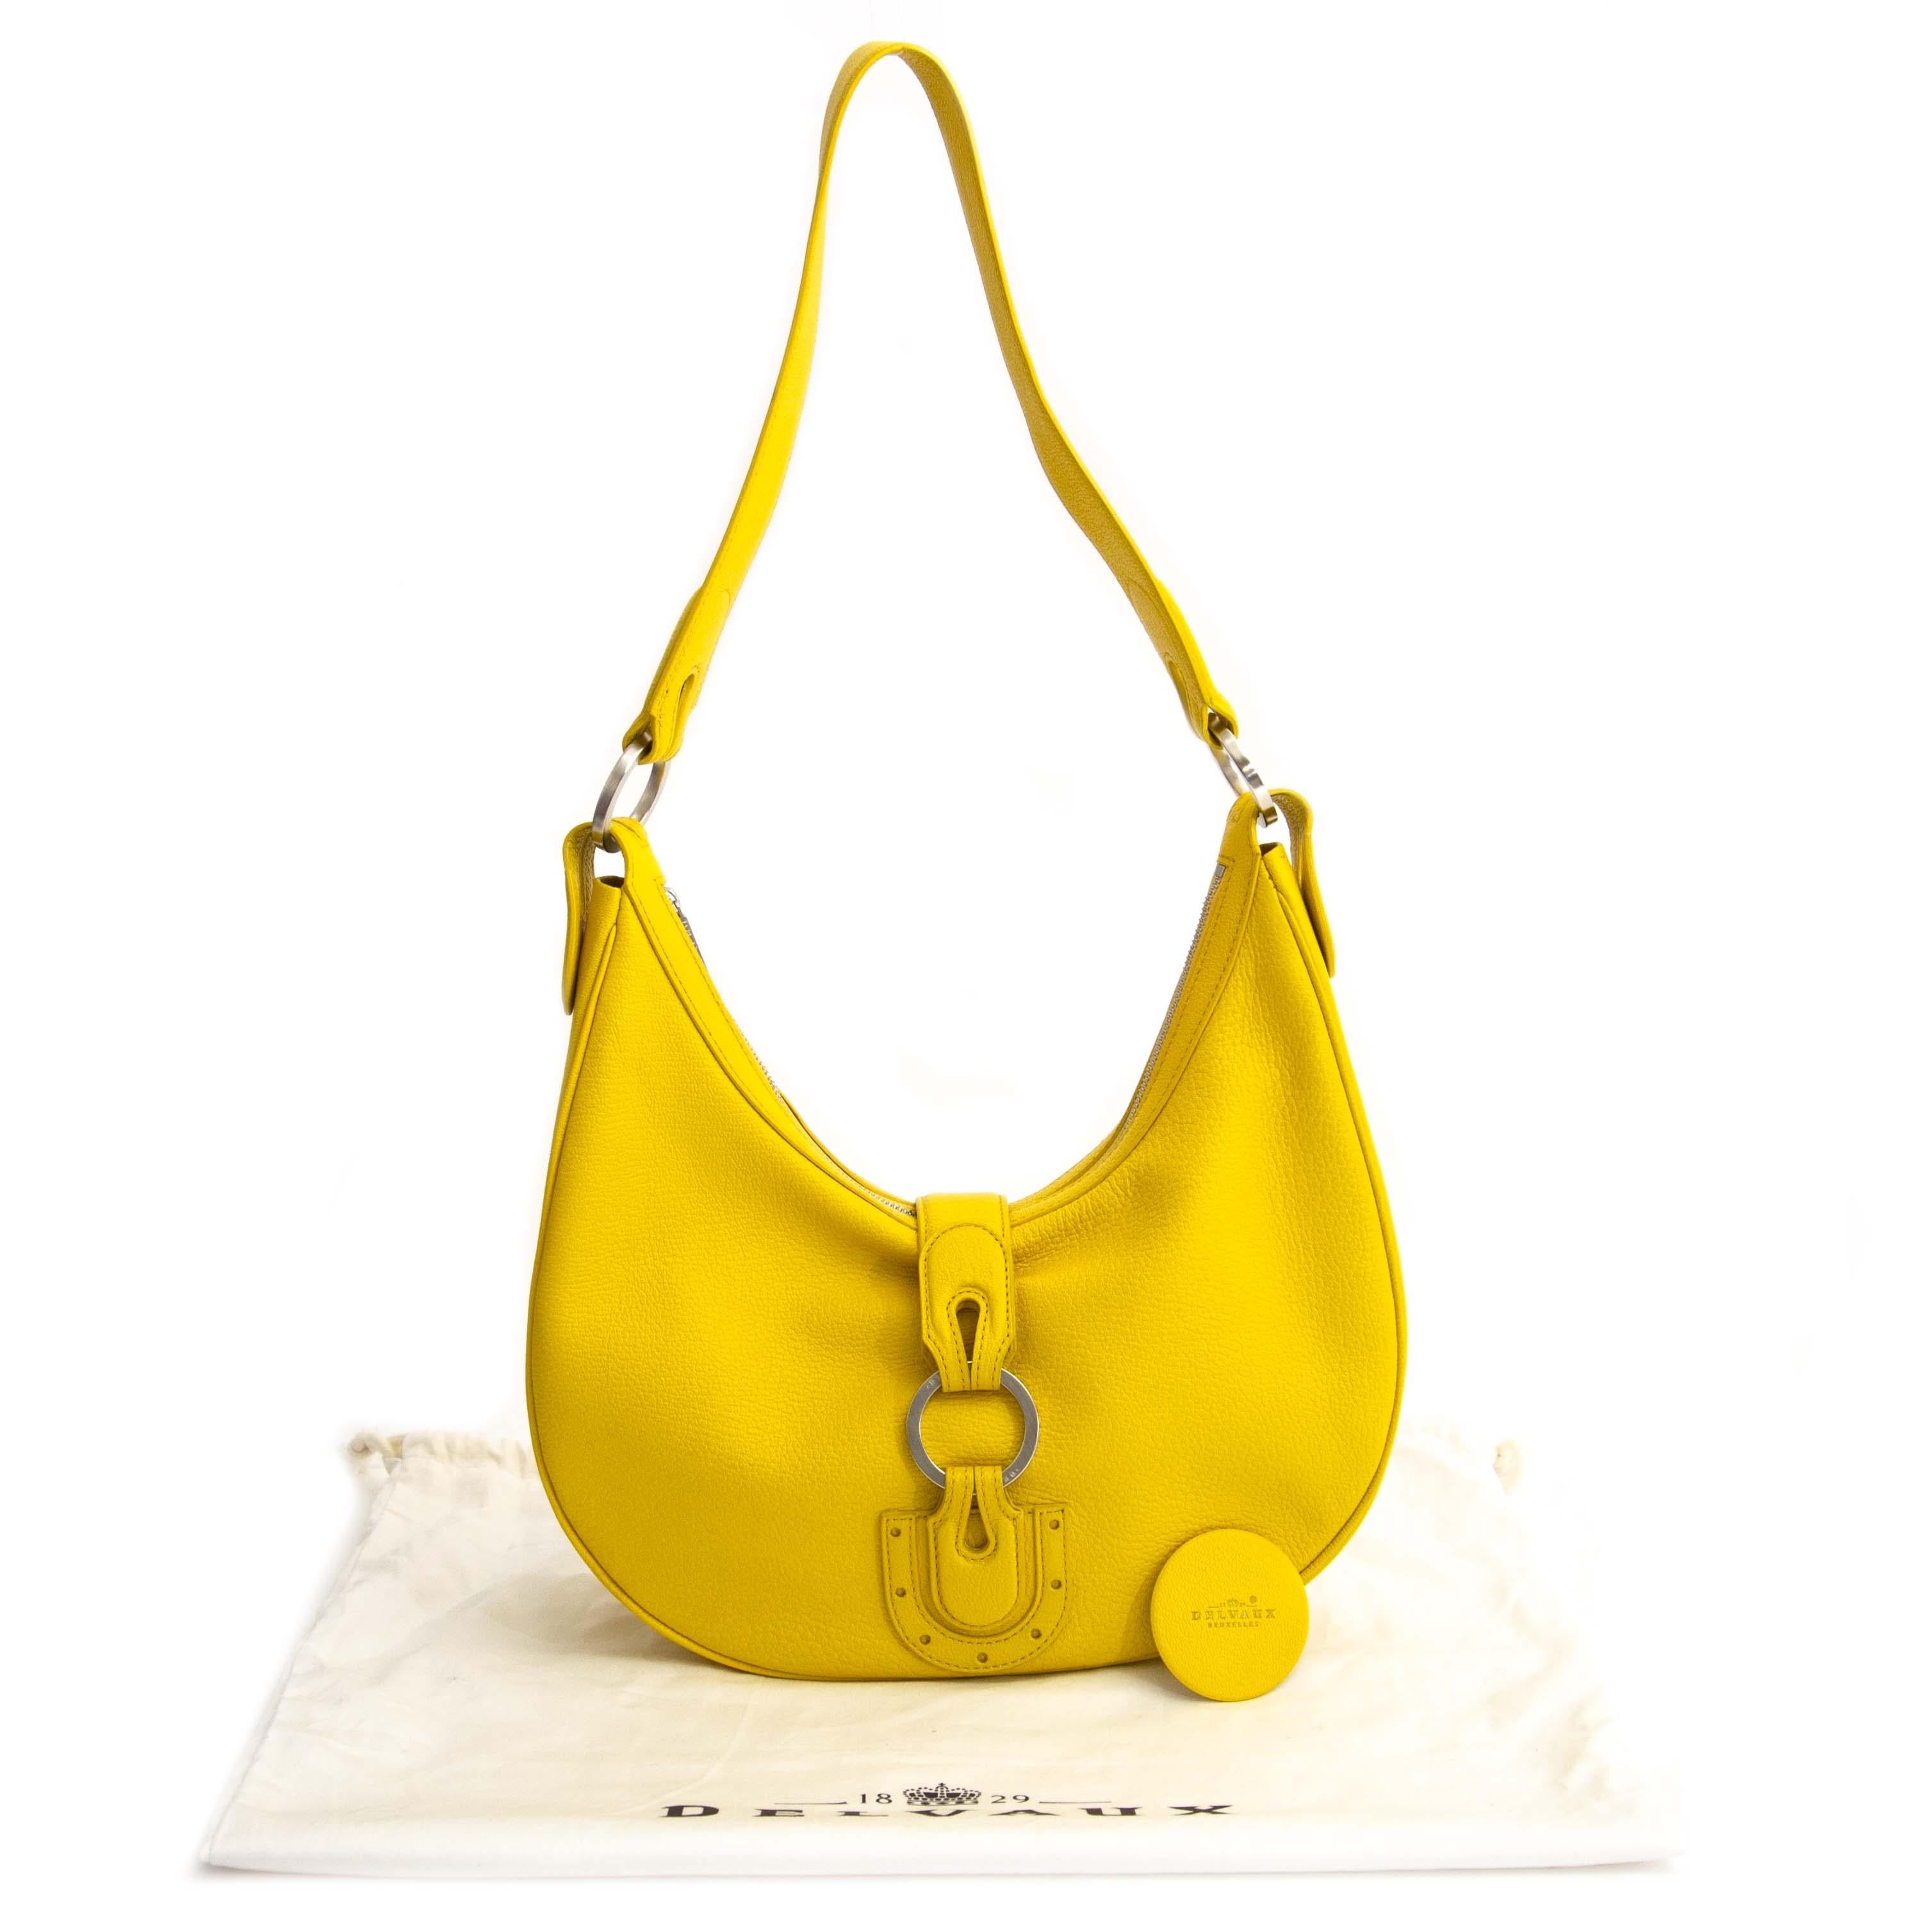 Very good  condition

Delvaux Camille PM Chèvre Glacée Souple Yellow

This Delvaux Camille PM bag is a ray of sunlight in your wardrobe! The bag is crafted from supple yellow goat leather.

The interior has an extra compartment with zipper. 

Comes